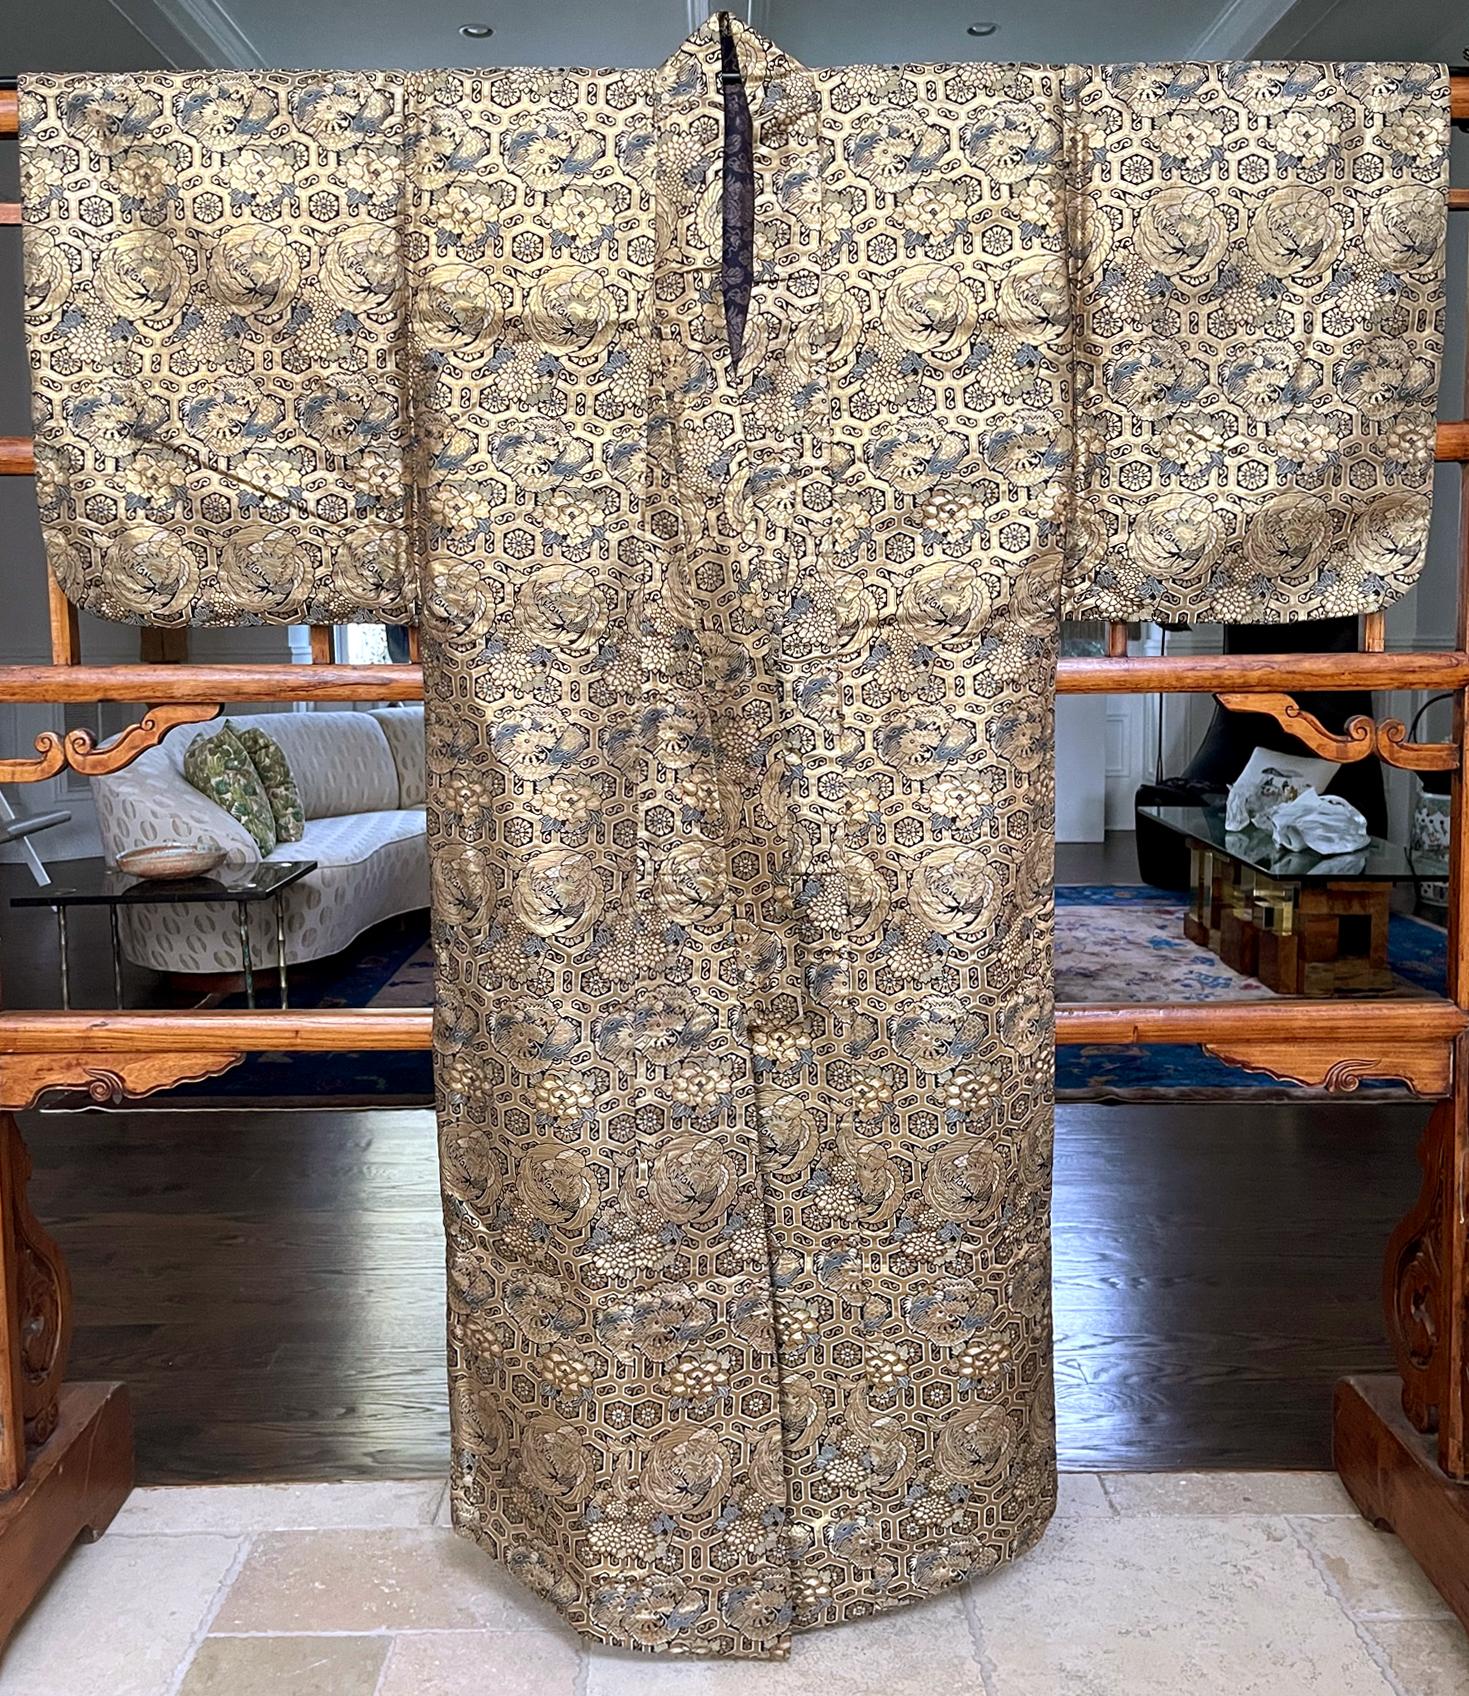 A Noh costume made from magnificent silk twill brocade woven with metallic gold threads circa 1930s. The robe is identified as 